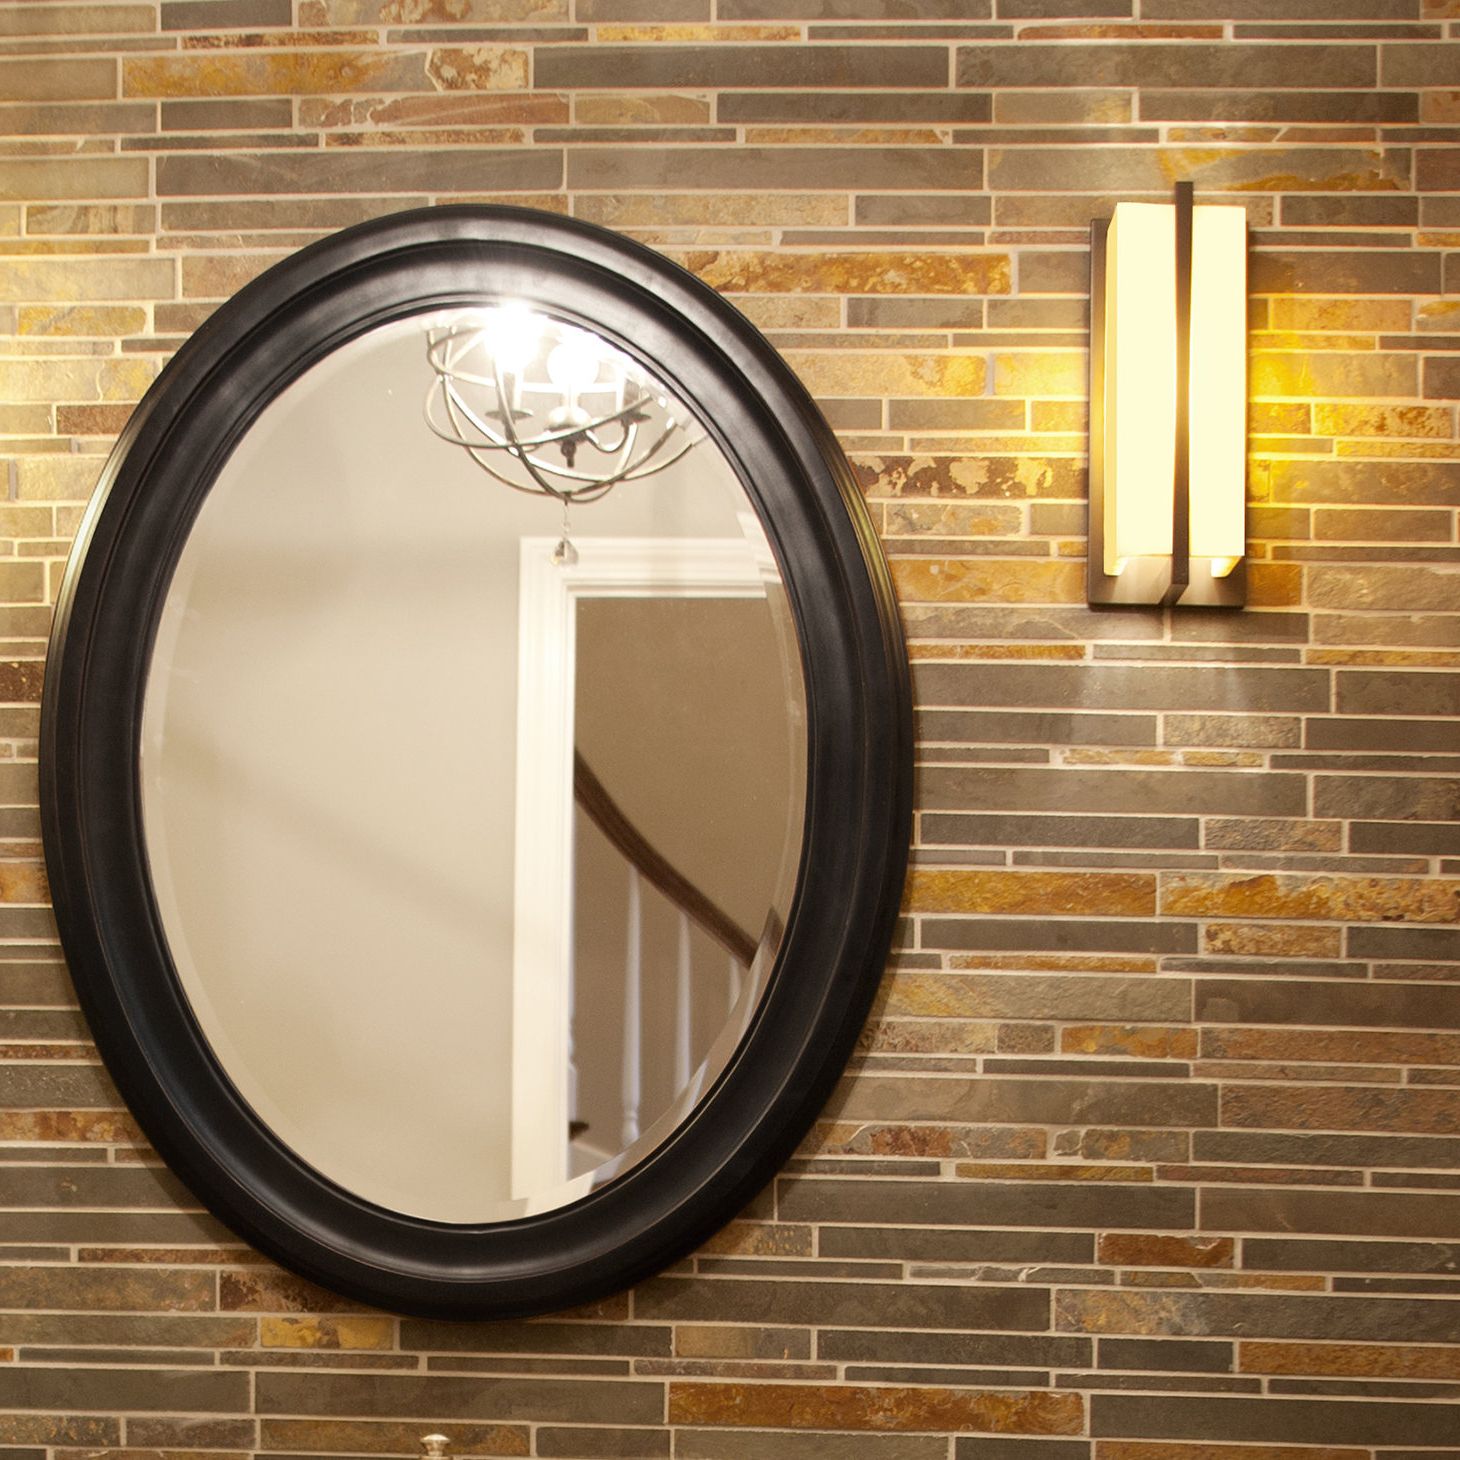 Pfister Oval Wood Wall Mirrors Pertaining To Popular Pfister Oval Wood Wall Mirror (Photo 2 of 20)